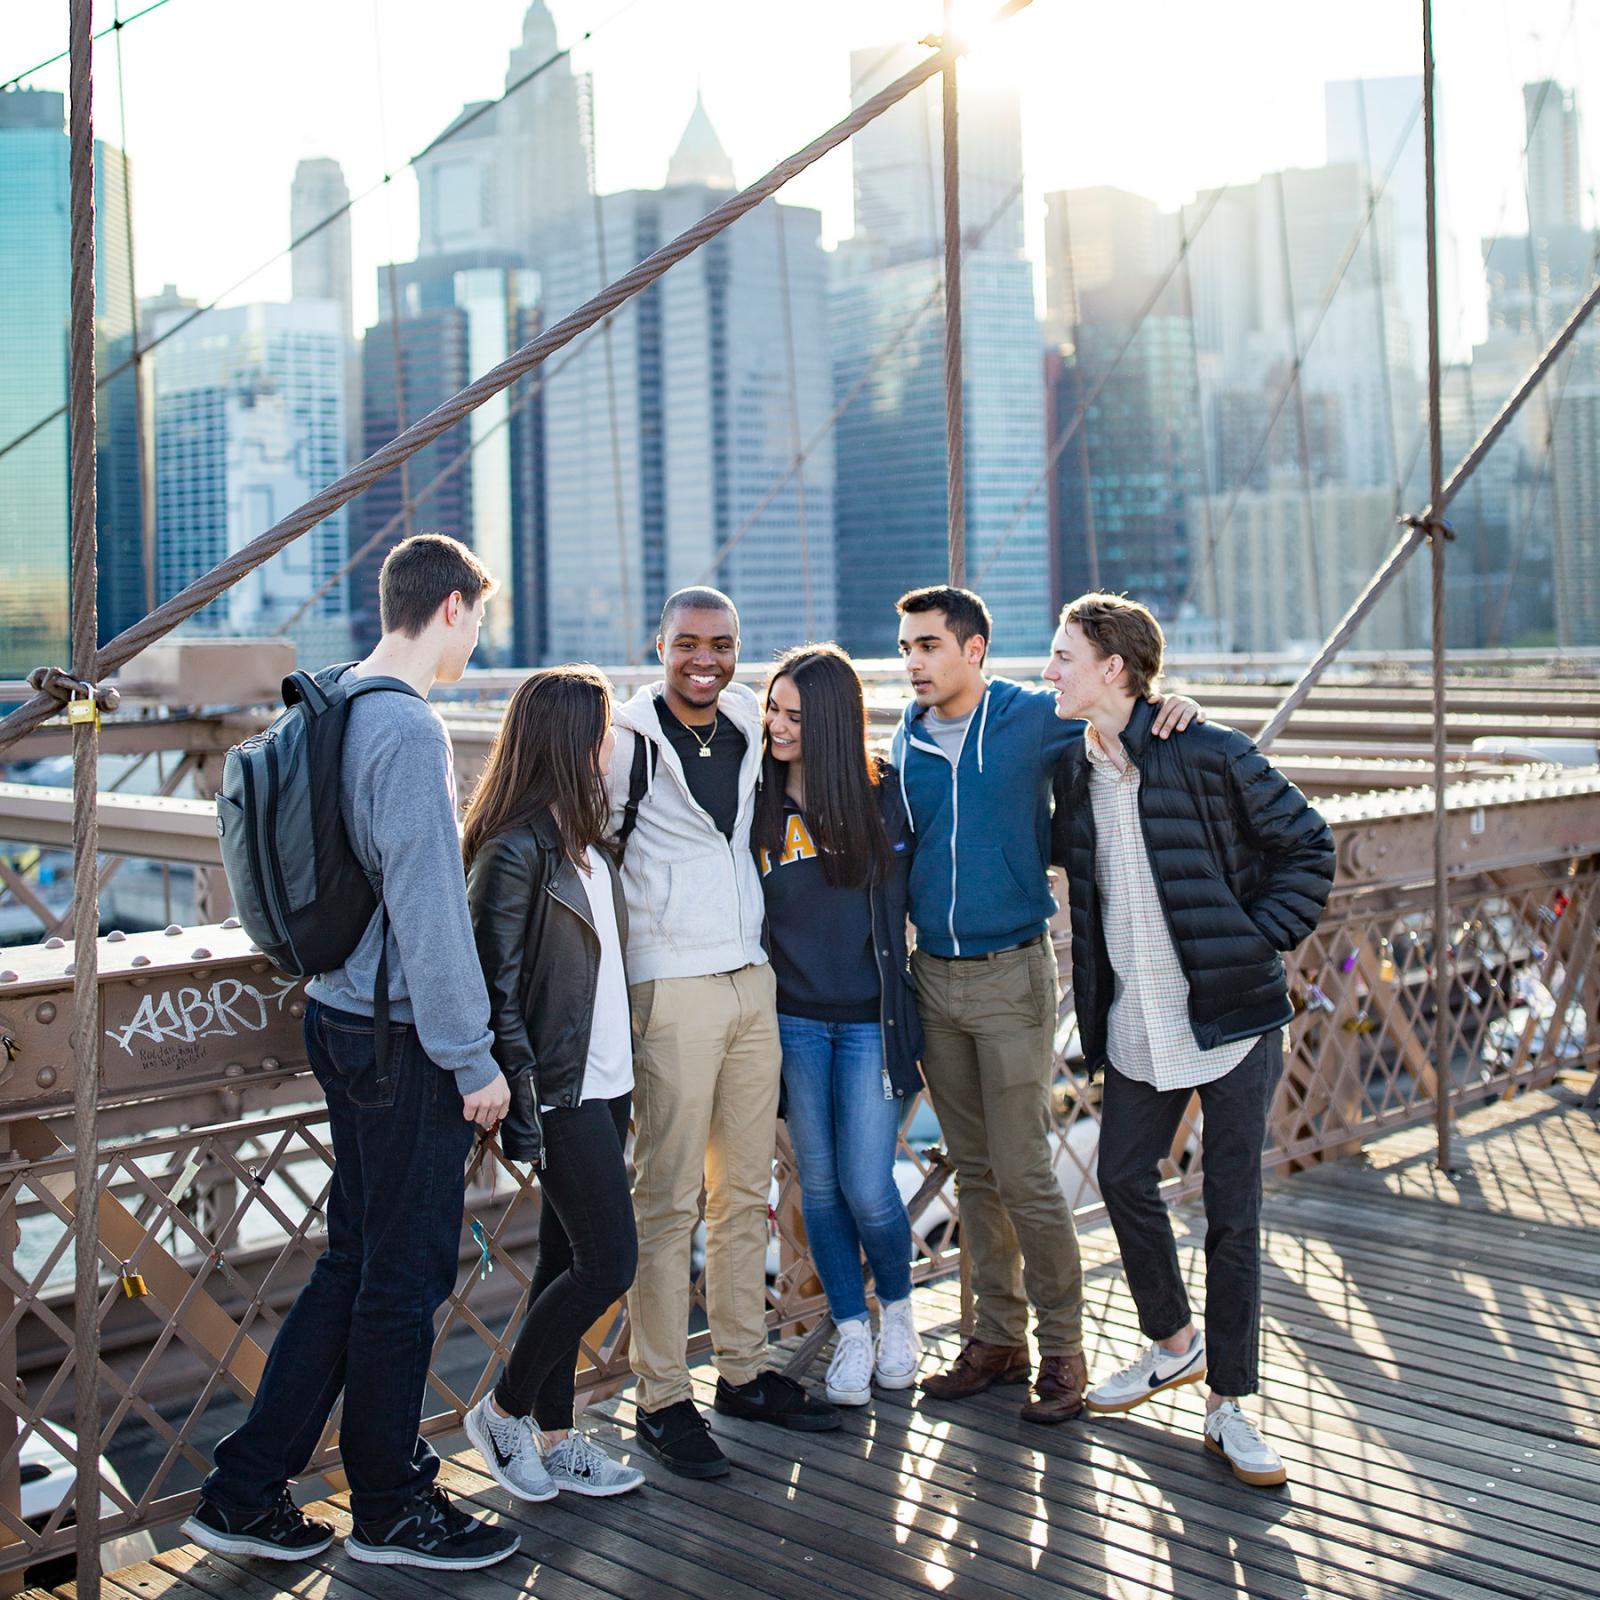 Pace University students standing on the Brooklyn Bridge